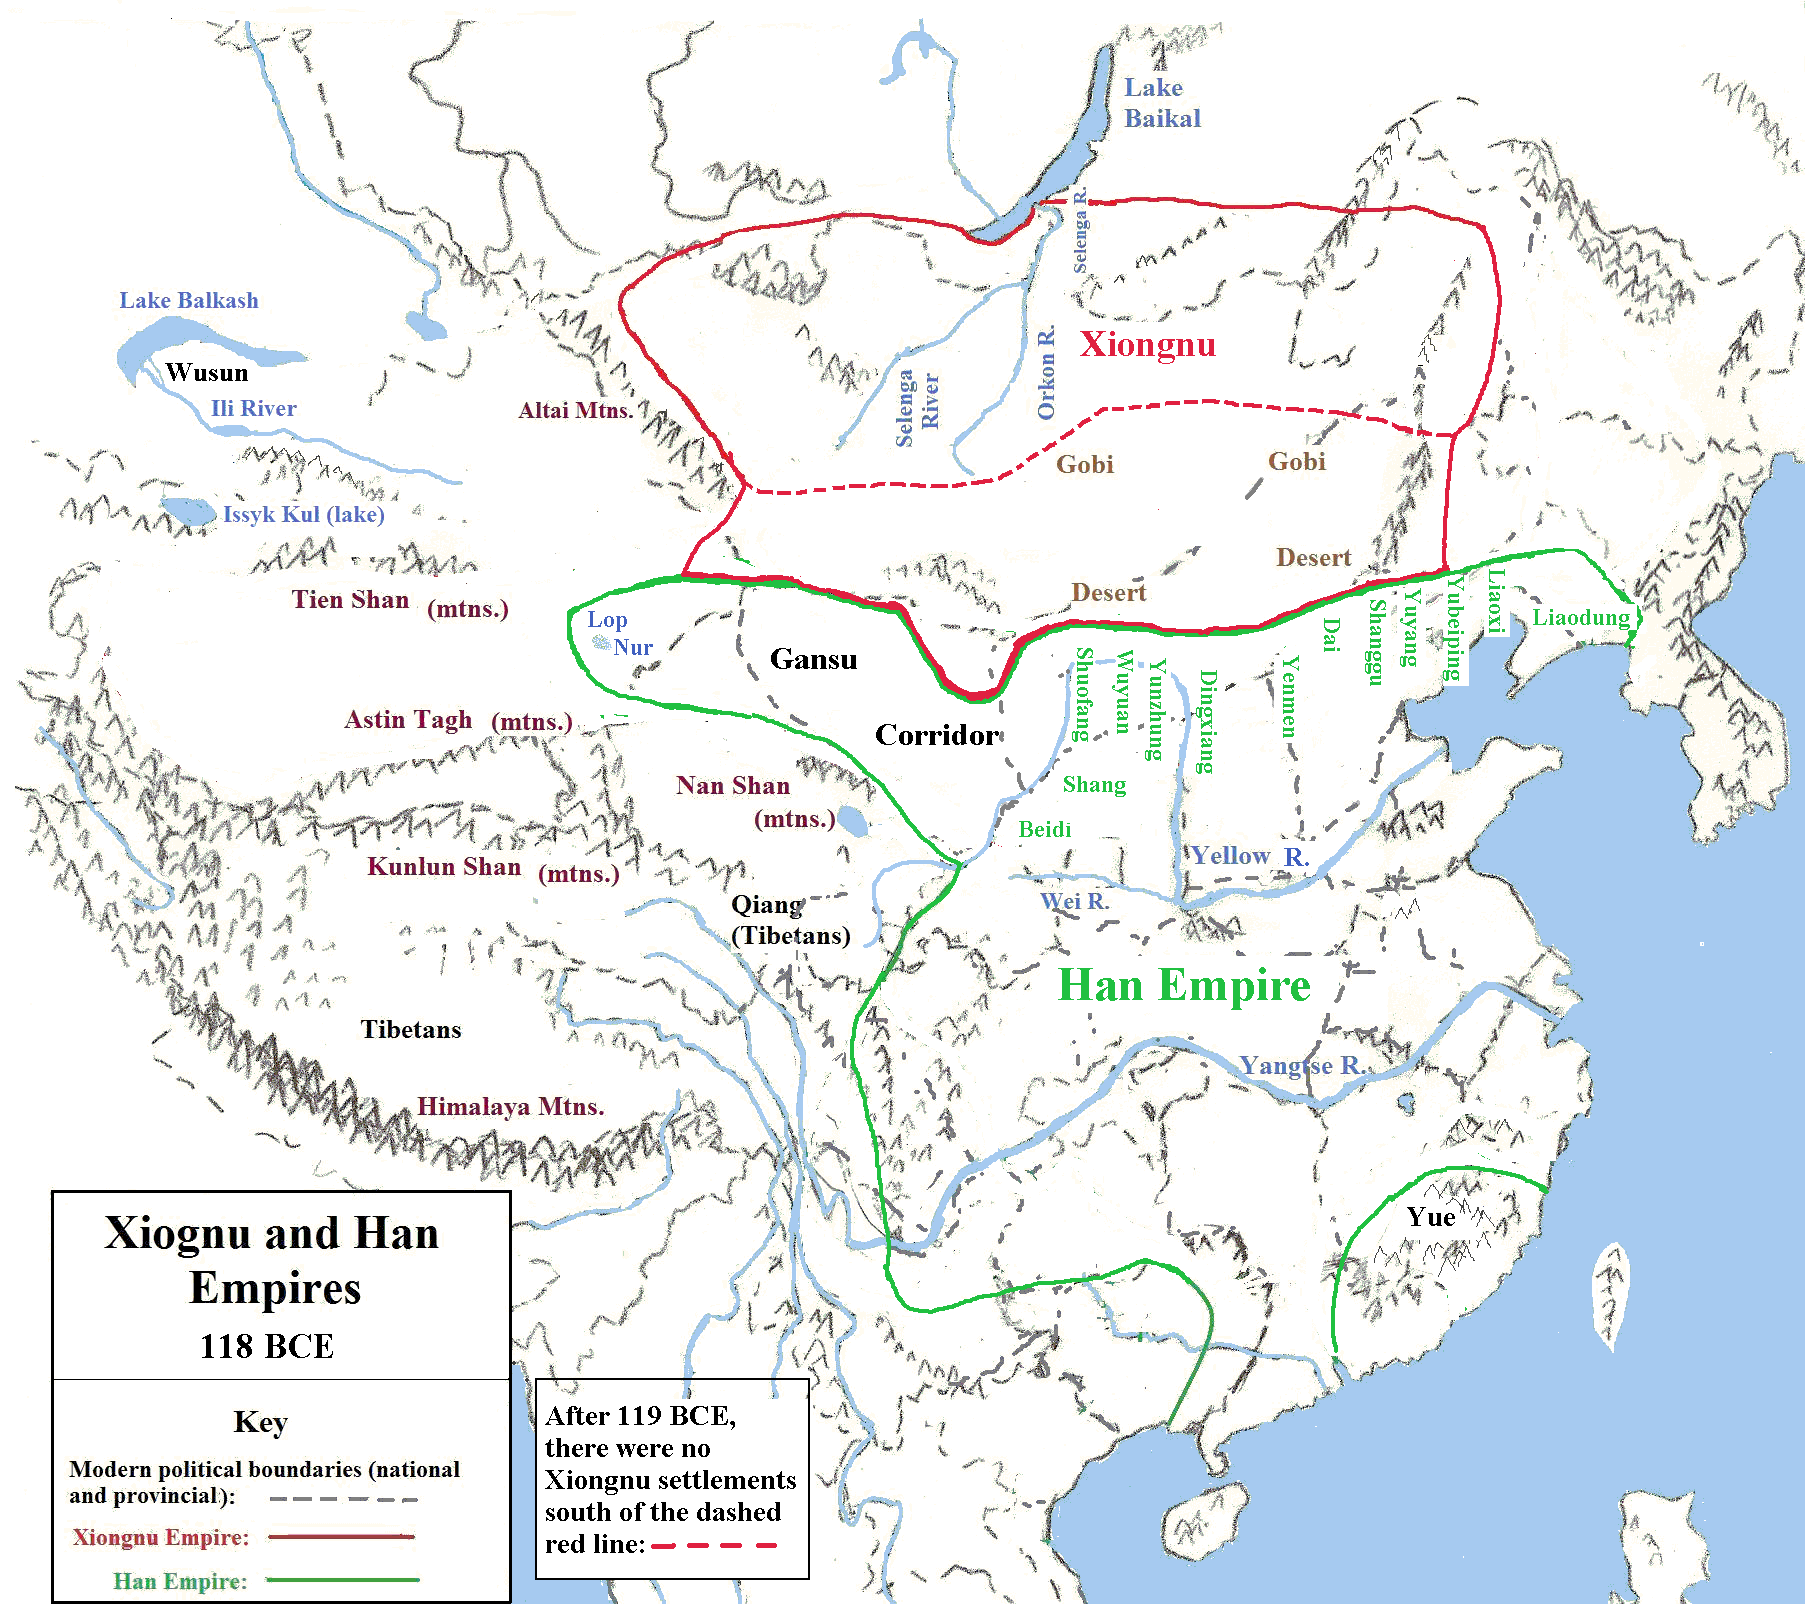 Map of Han and Xiongnu Empires in 118 BCE